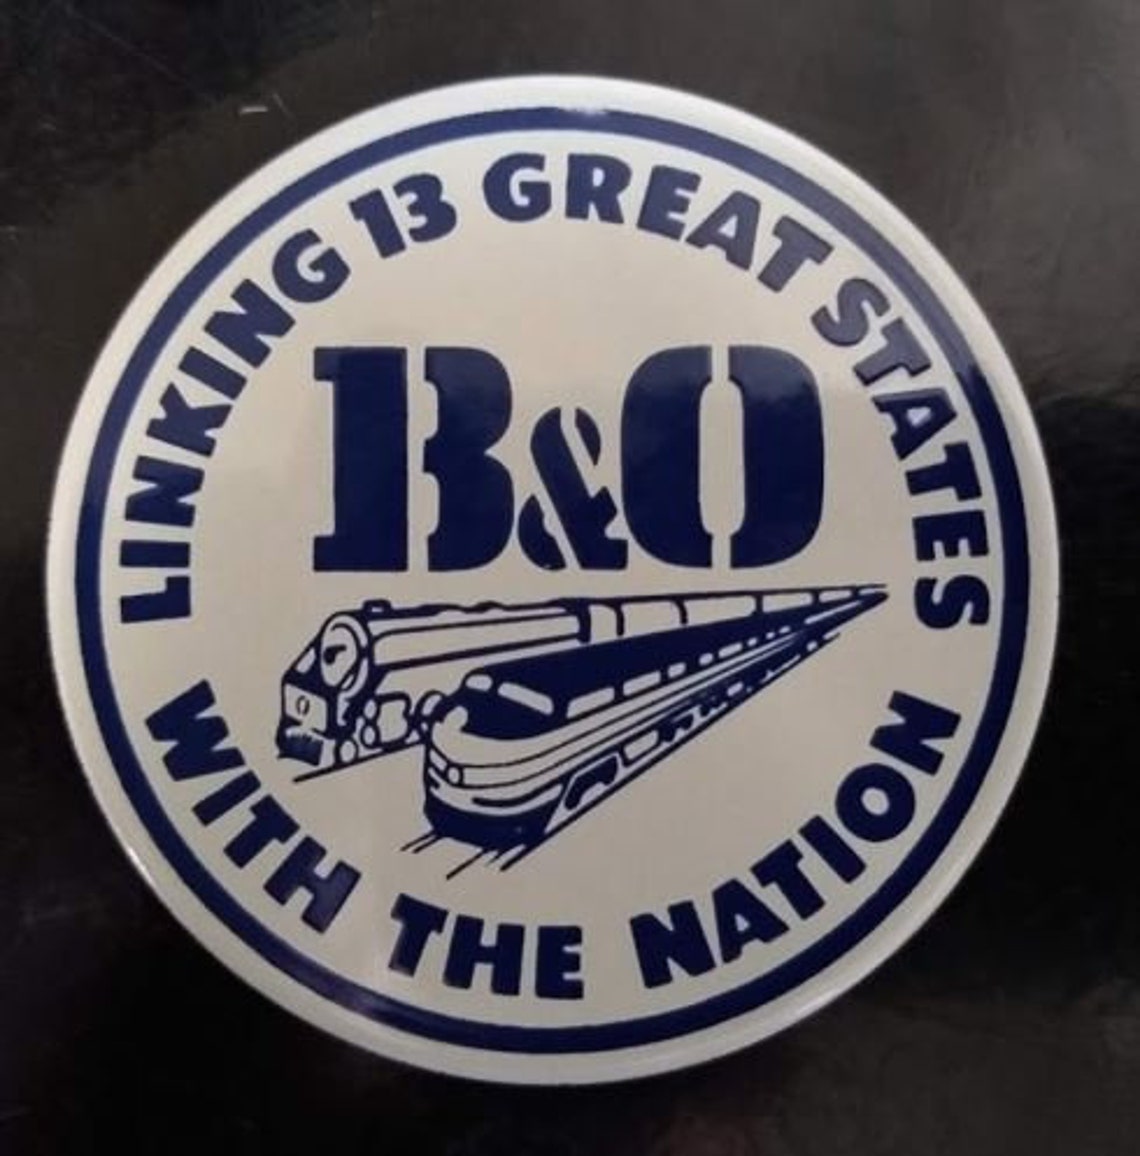 B&O RAILROAD Linking 13 Great States With the Nation - Etsy